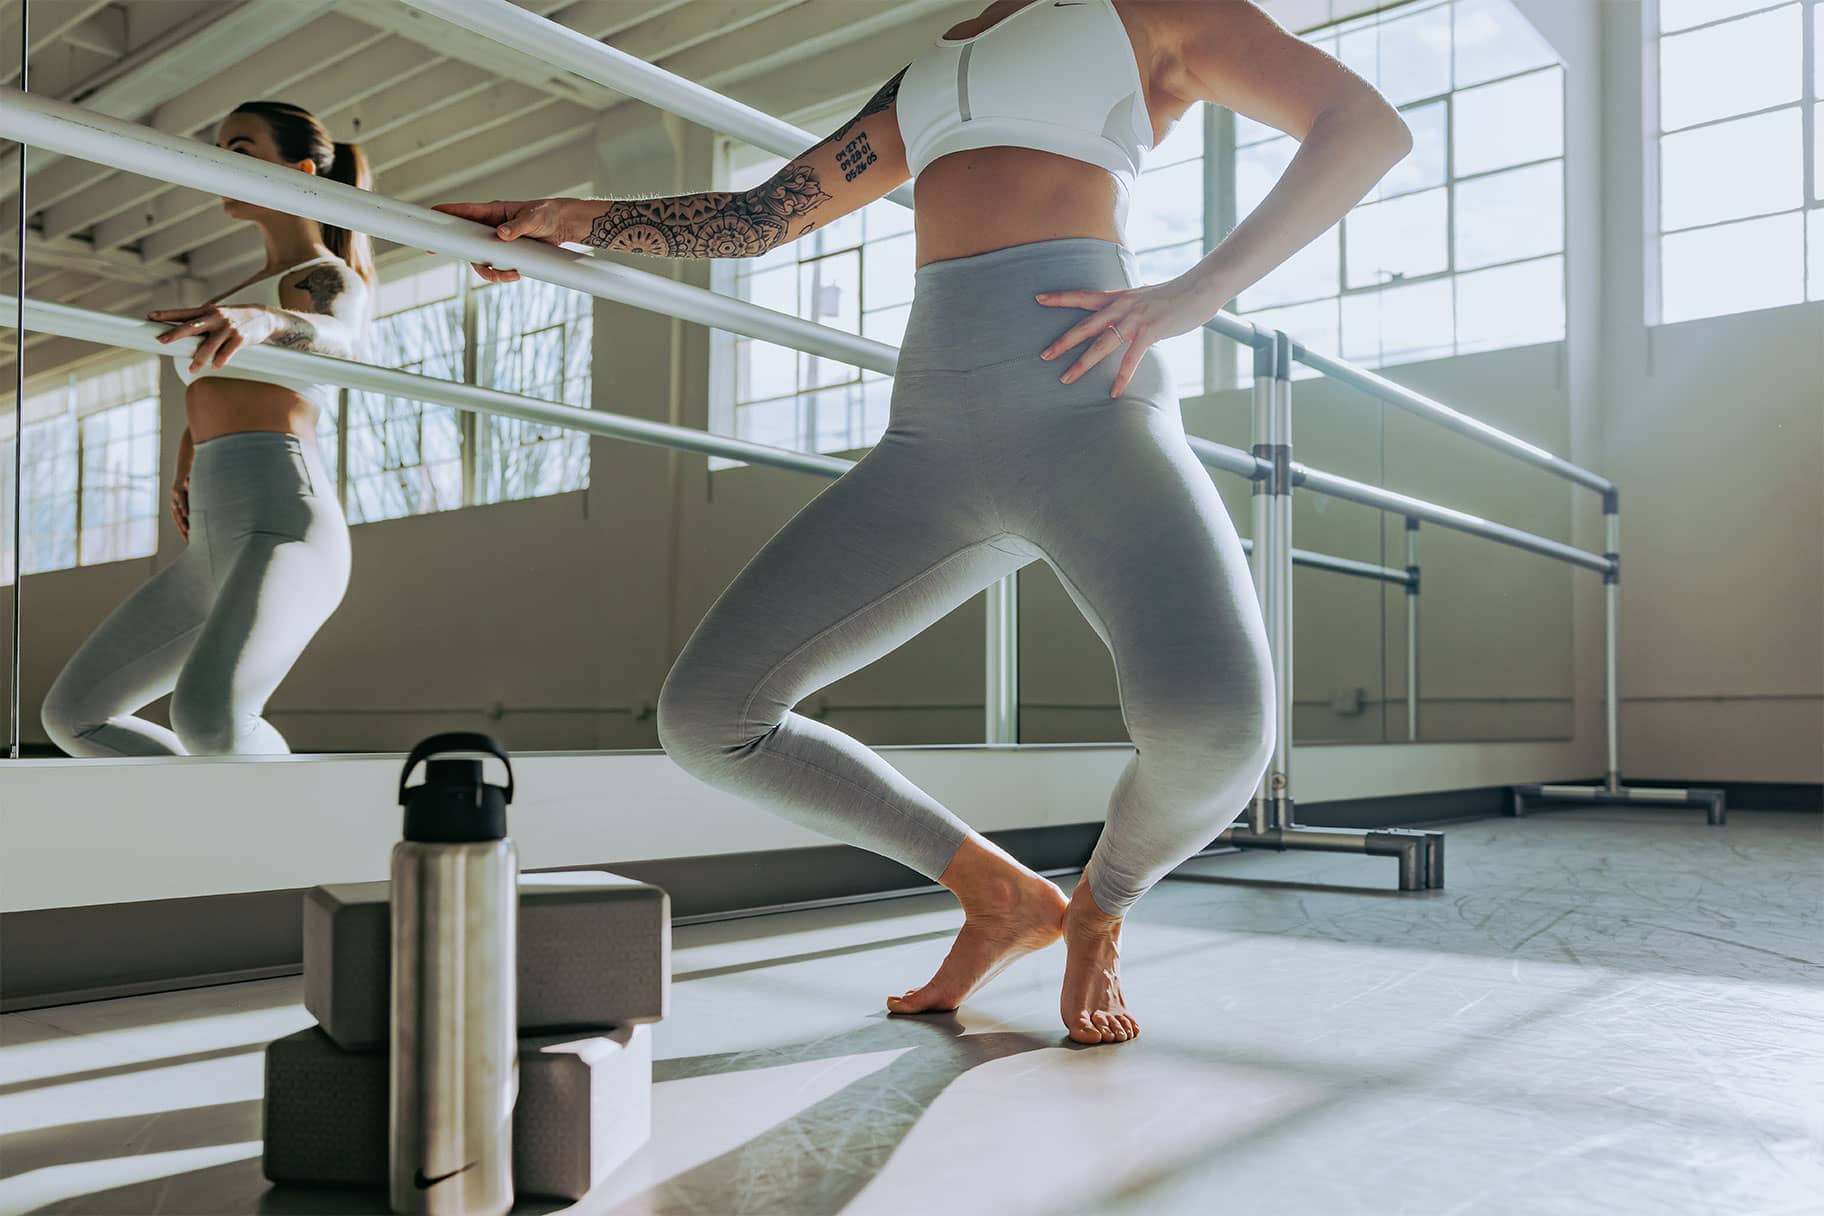 What Is Barre—And What Should You Wear To Do It?. Nike BG